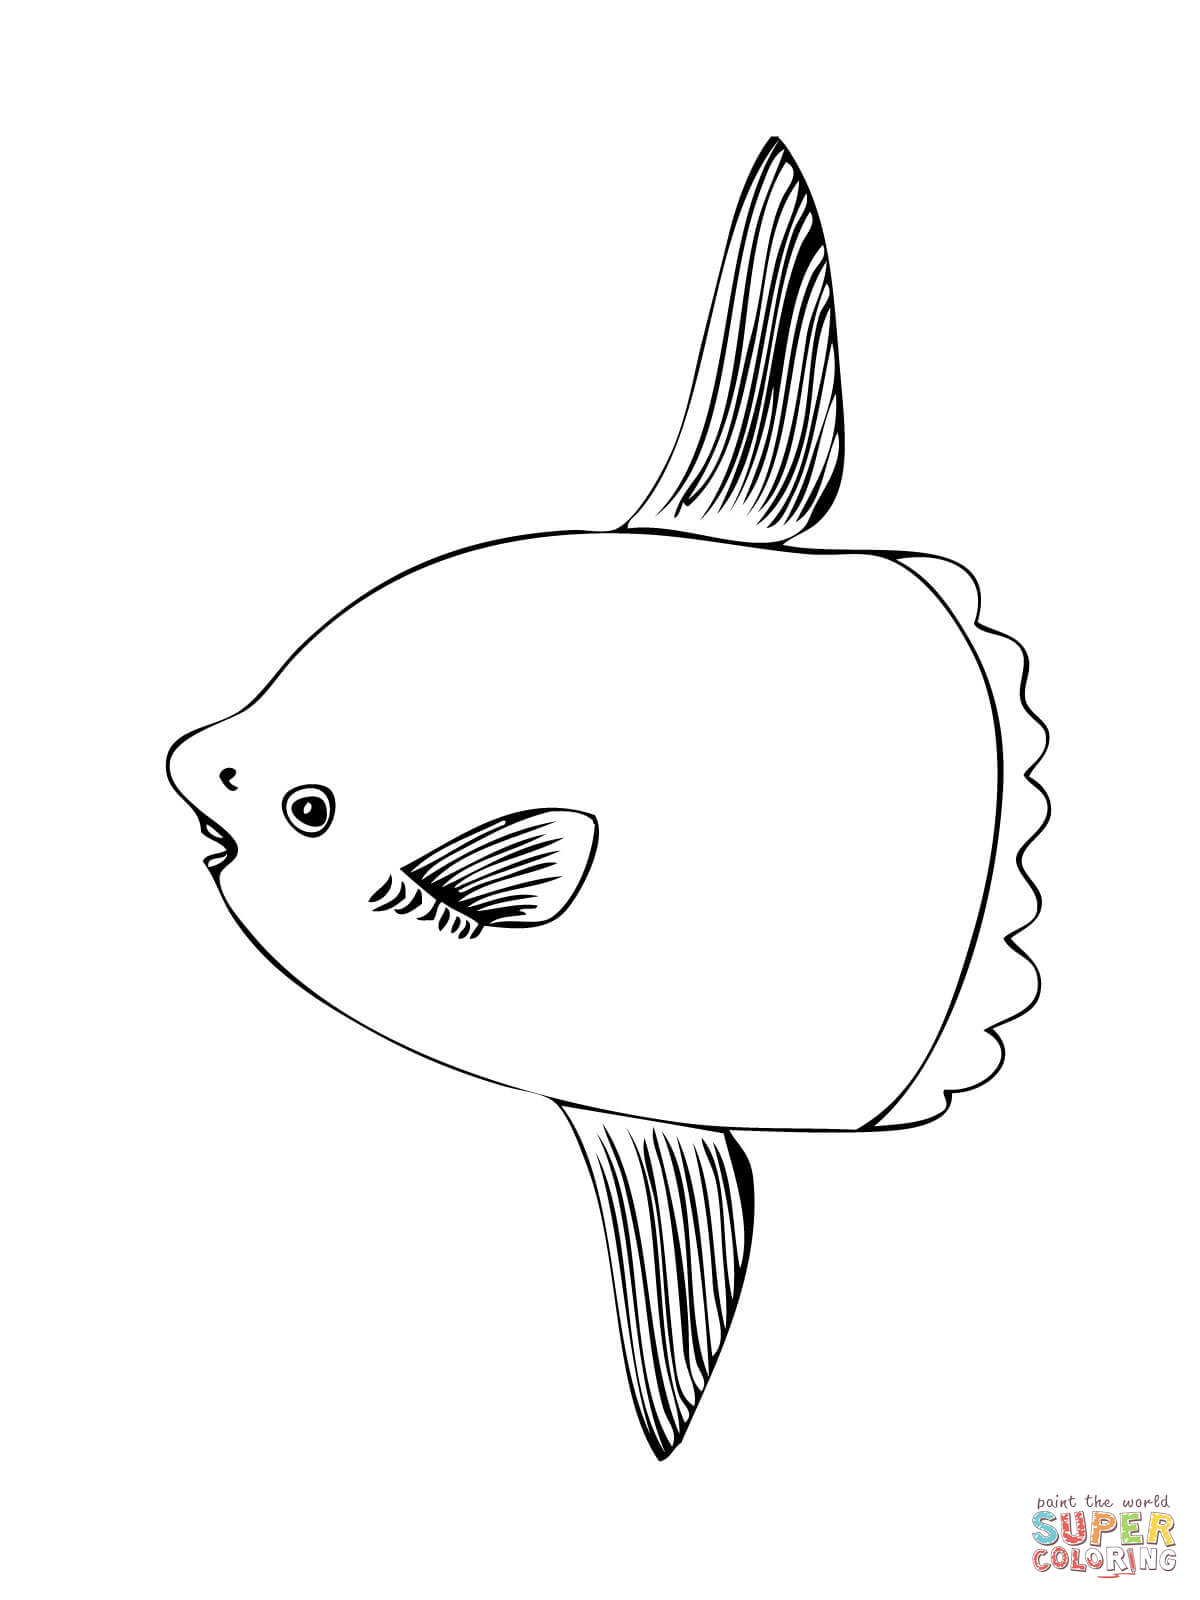 Sunfish coloring page free printable coloring pages